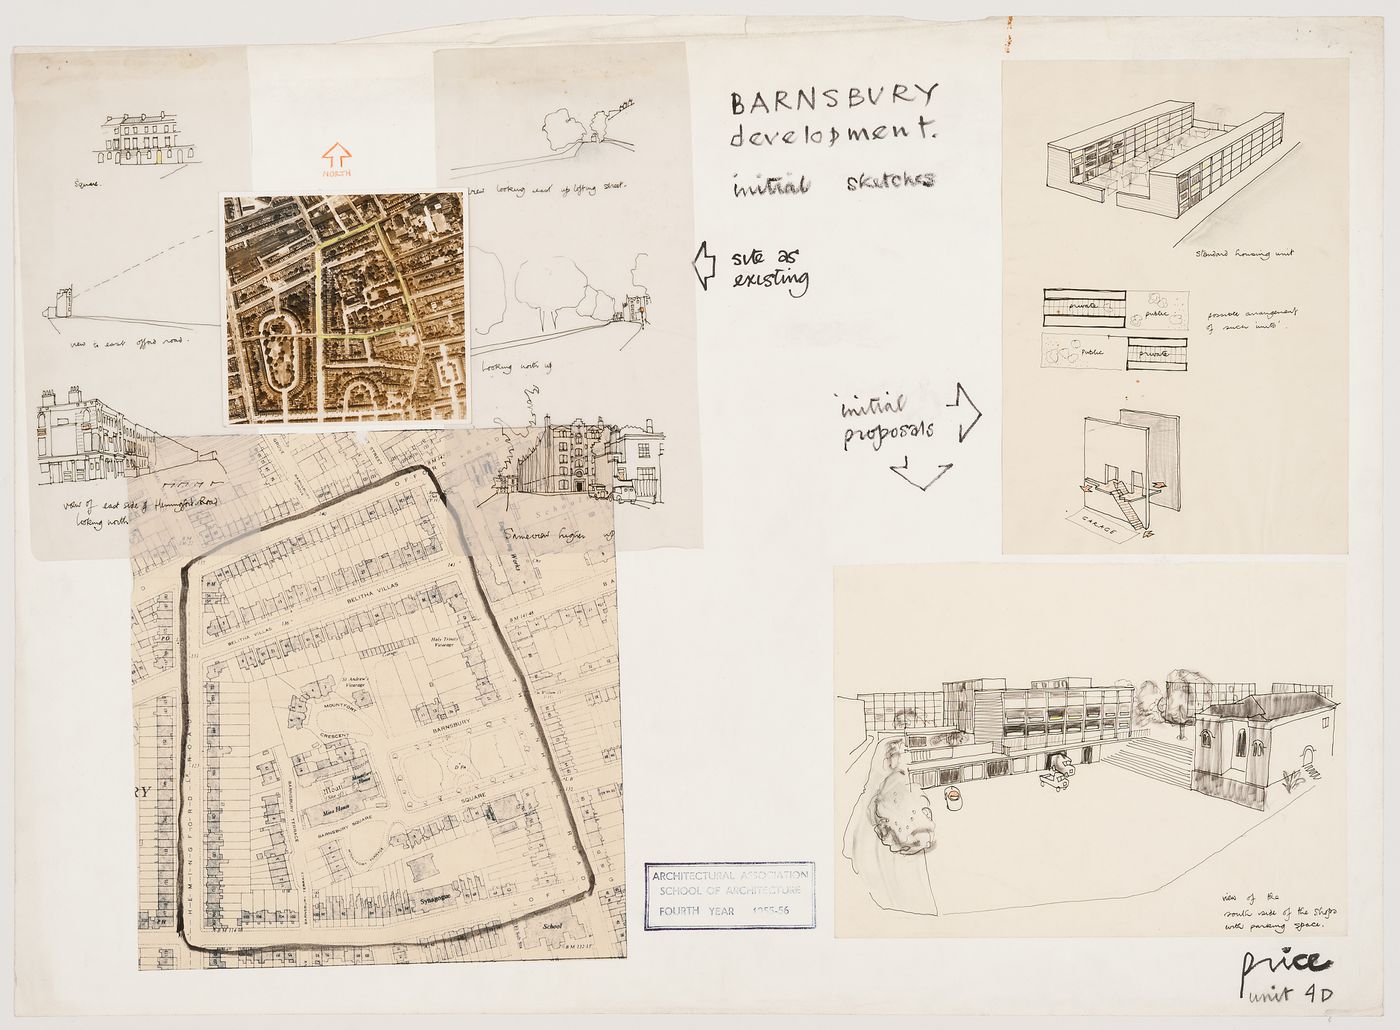 Initial sketches for Barnsbury Development, London, England